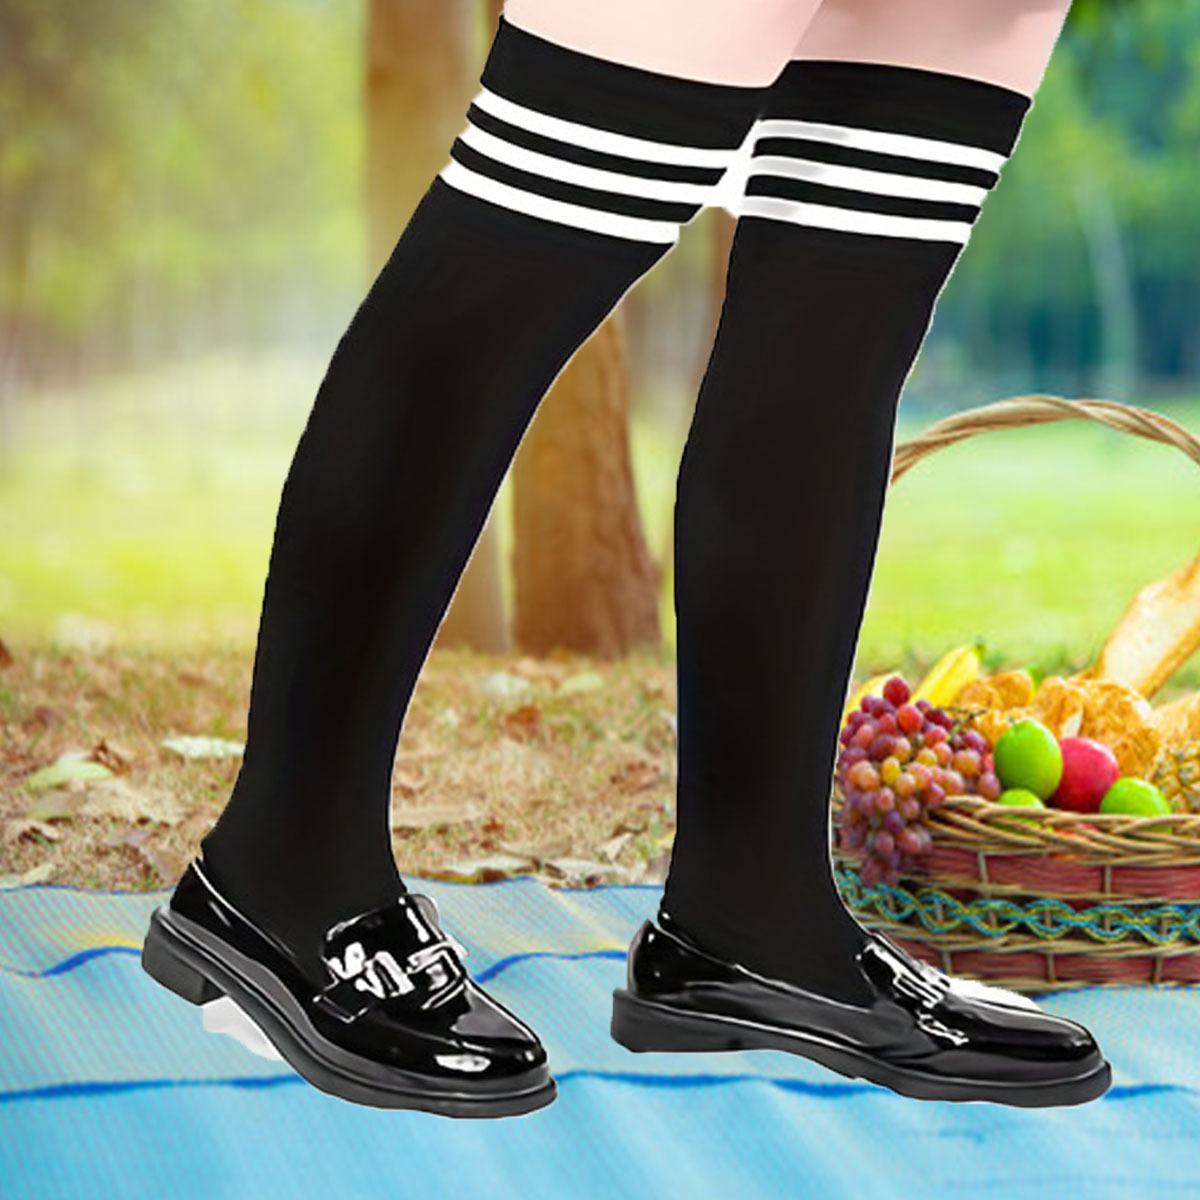 6 Pairs One Size Knee-High Socks Thigh High Stockings Over Knee Socks For  Women, Mixed Colors